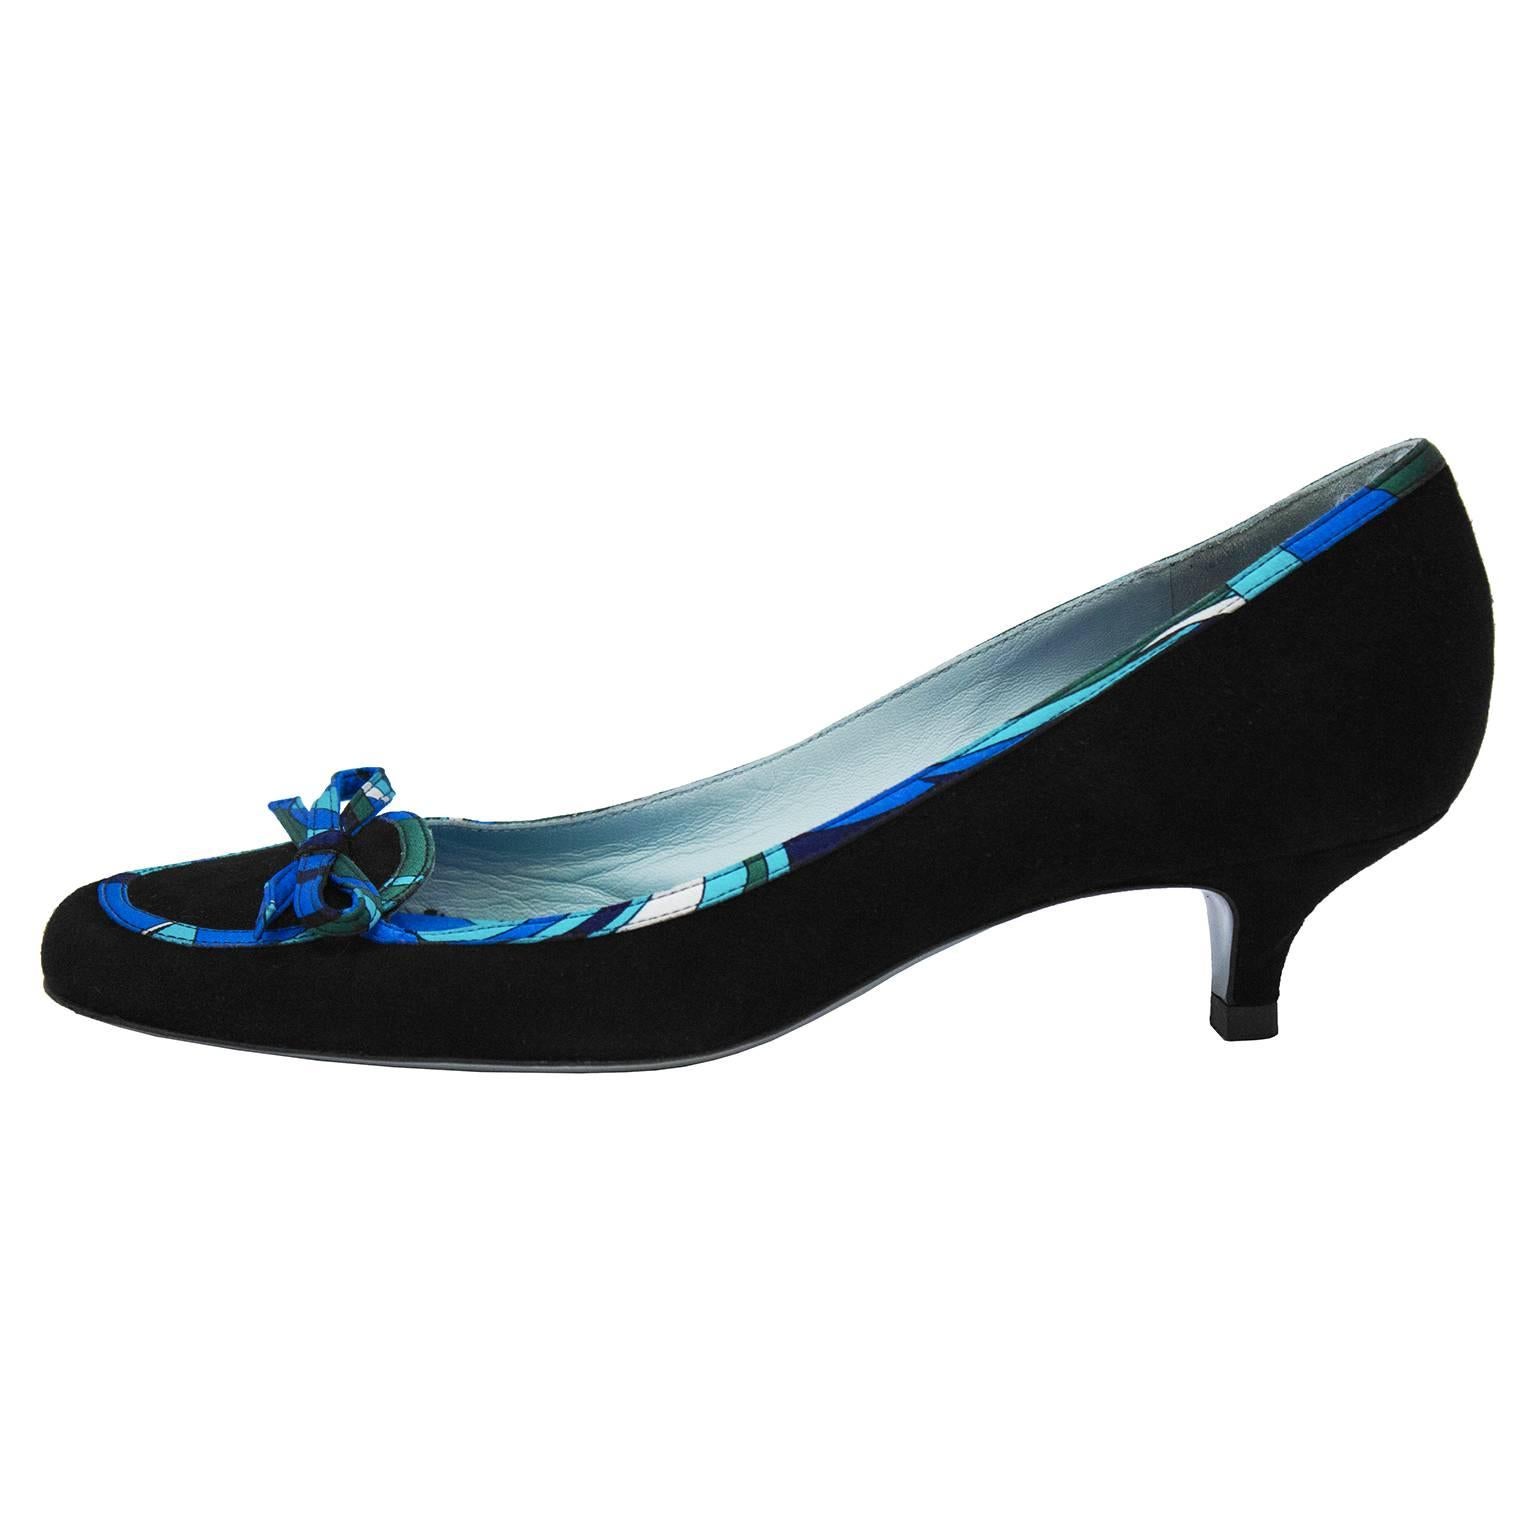 Sweet Emilio Pucci black kitten heels from the early 2000's, trimmed in classic royal blue, mint green and black Pucci print. The insole is also finished in matching Pucci print and the shoe is adorned with a bow on top of the tongue. In excellent